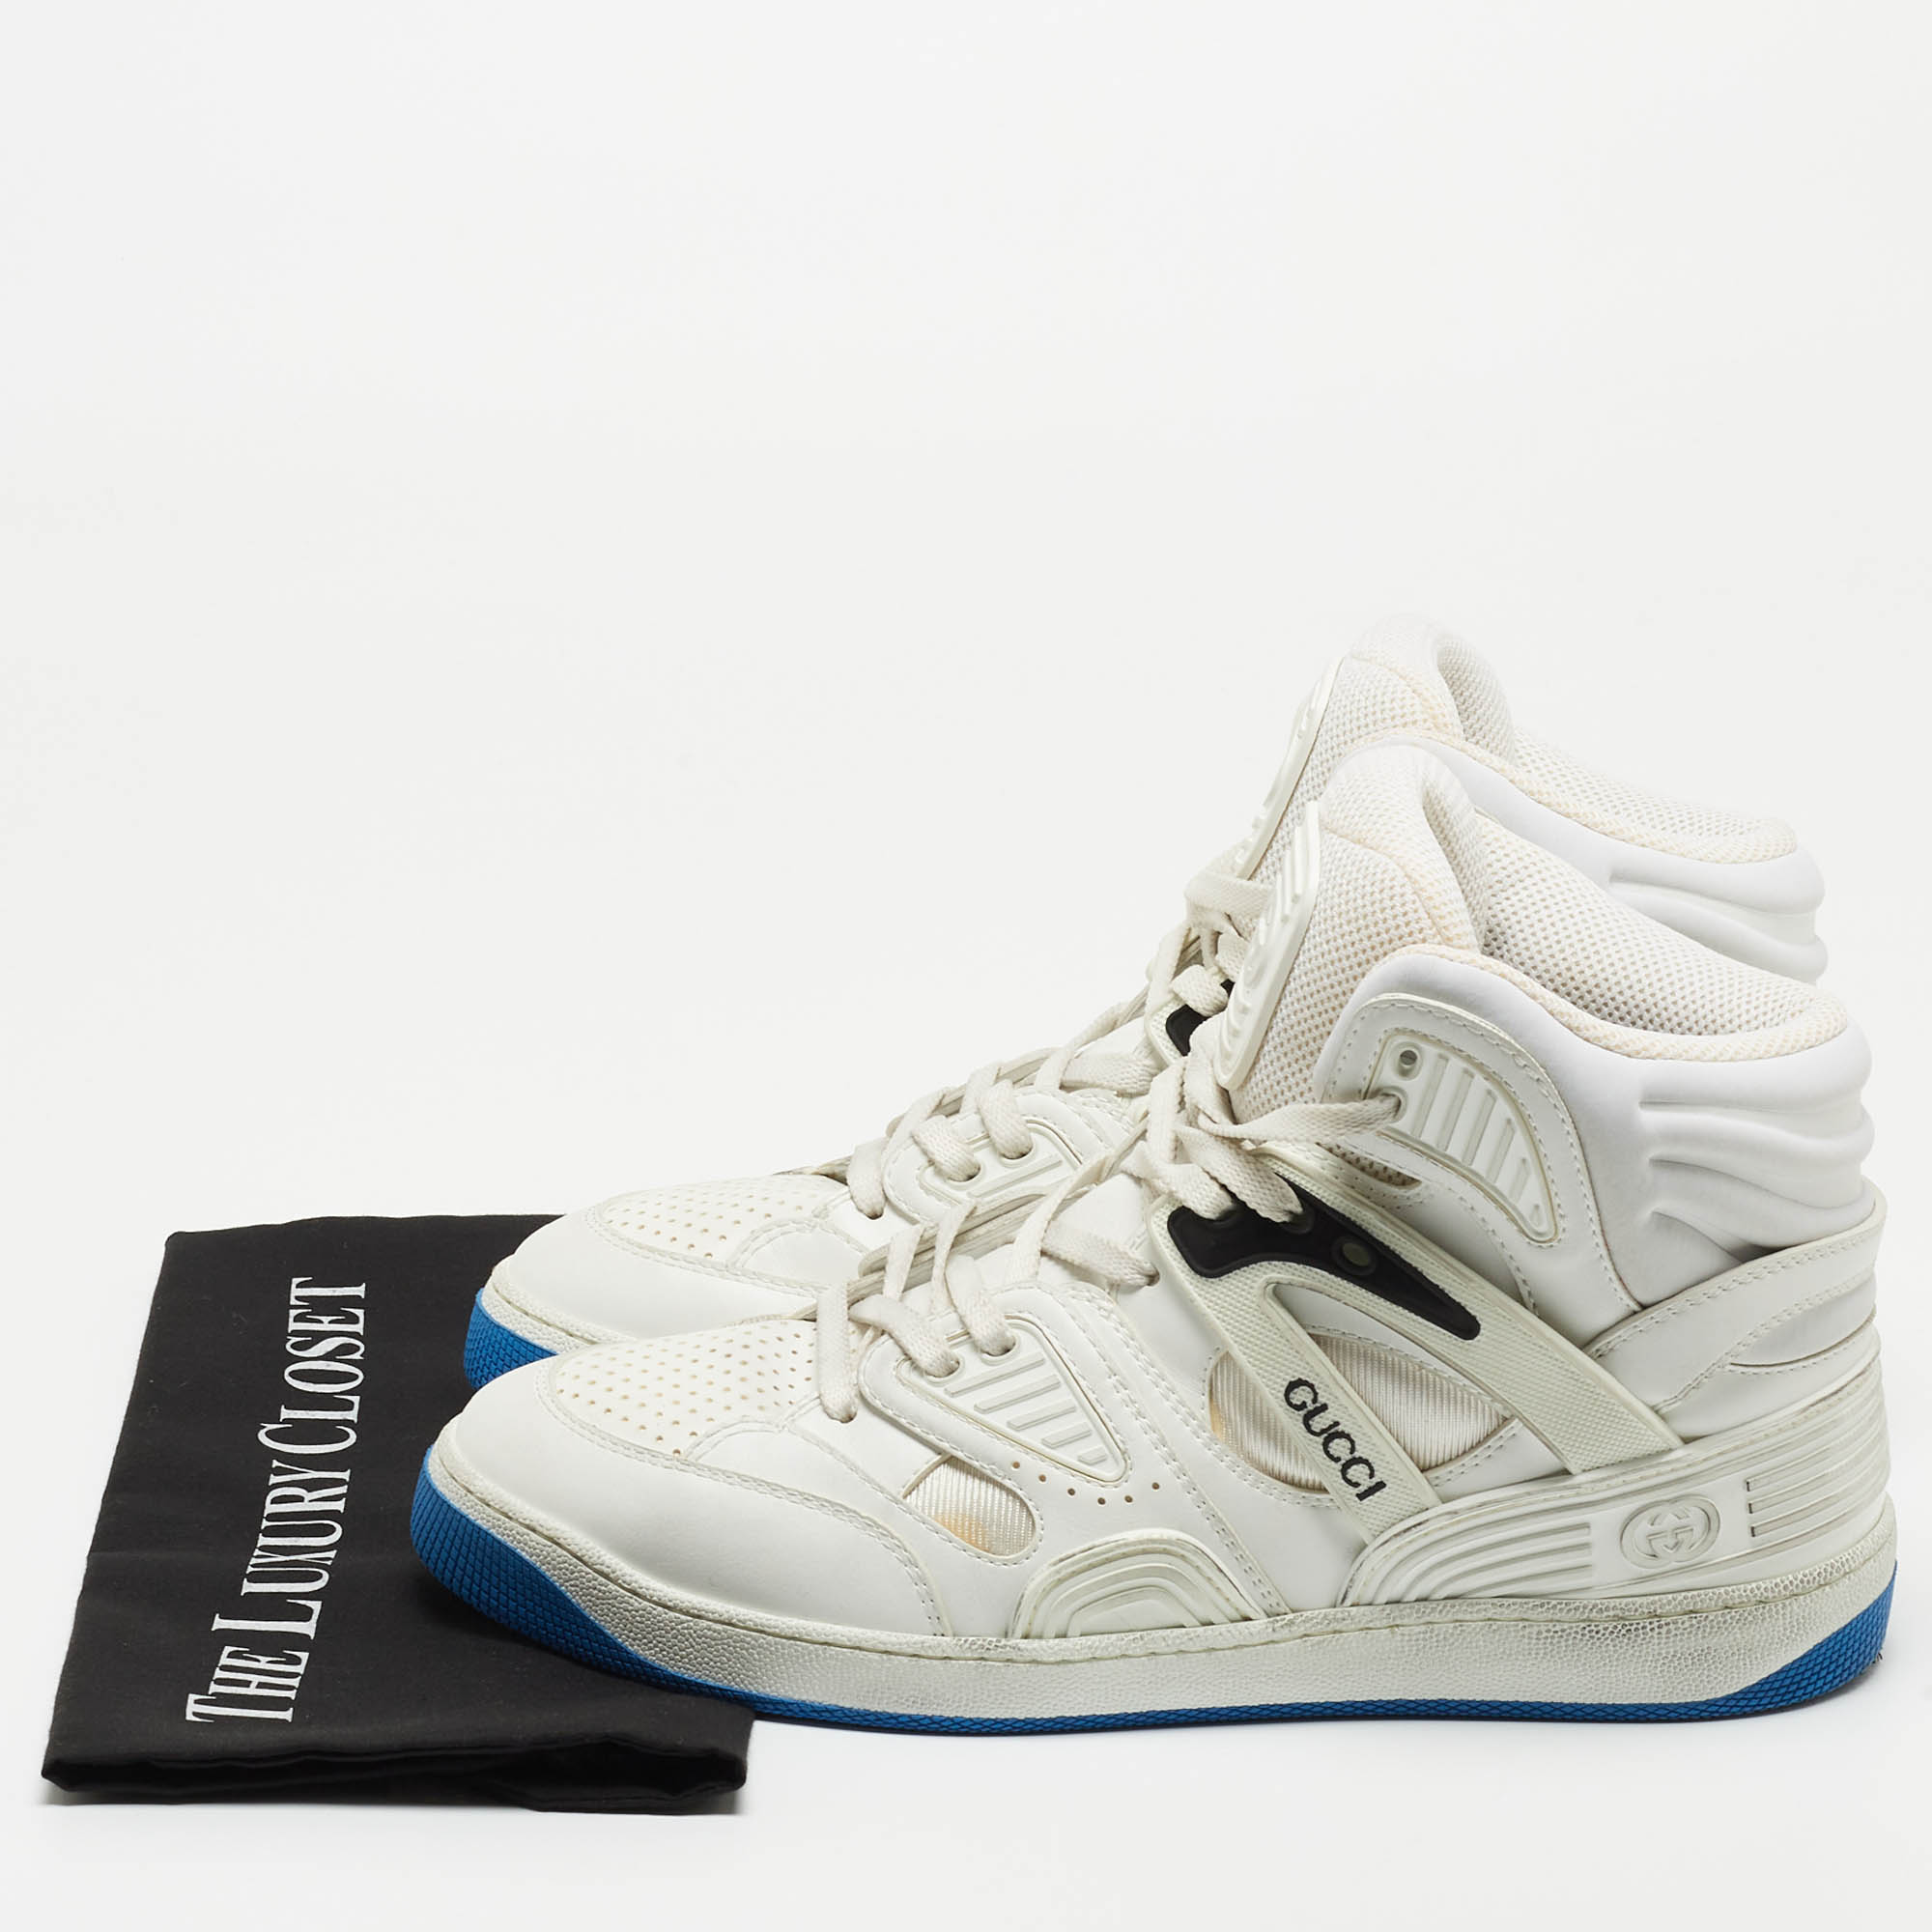 Gucci White Leather Basketball High Top Sneakers Size 43